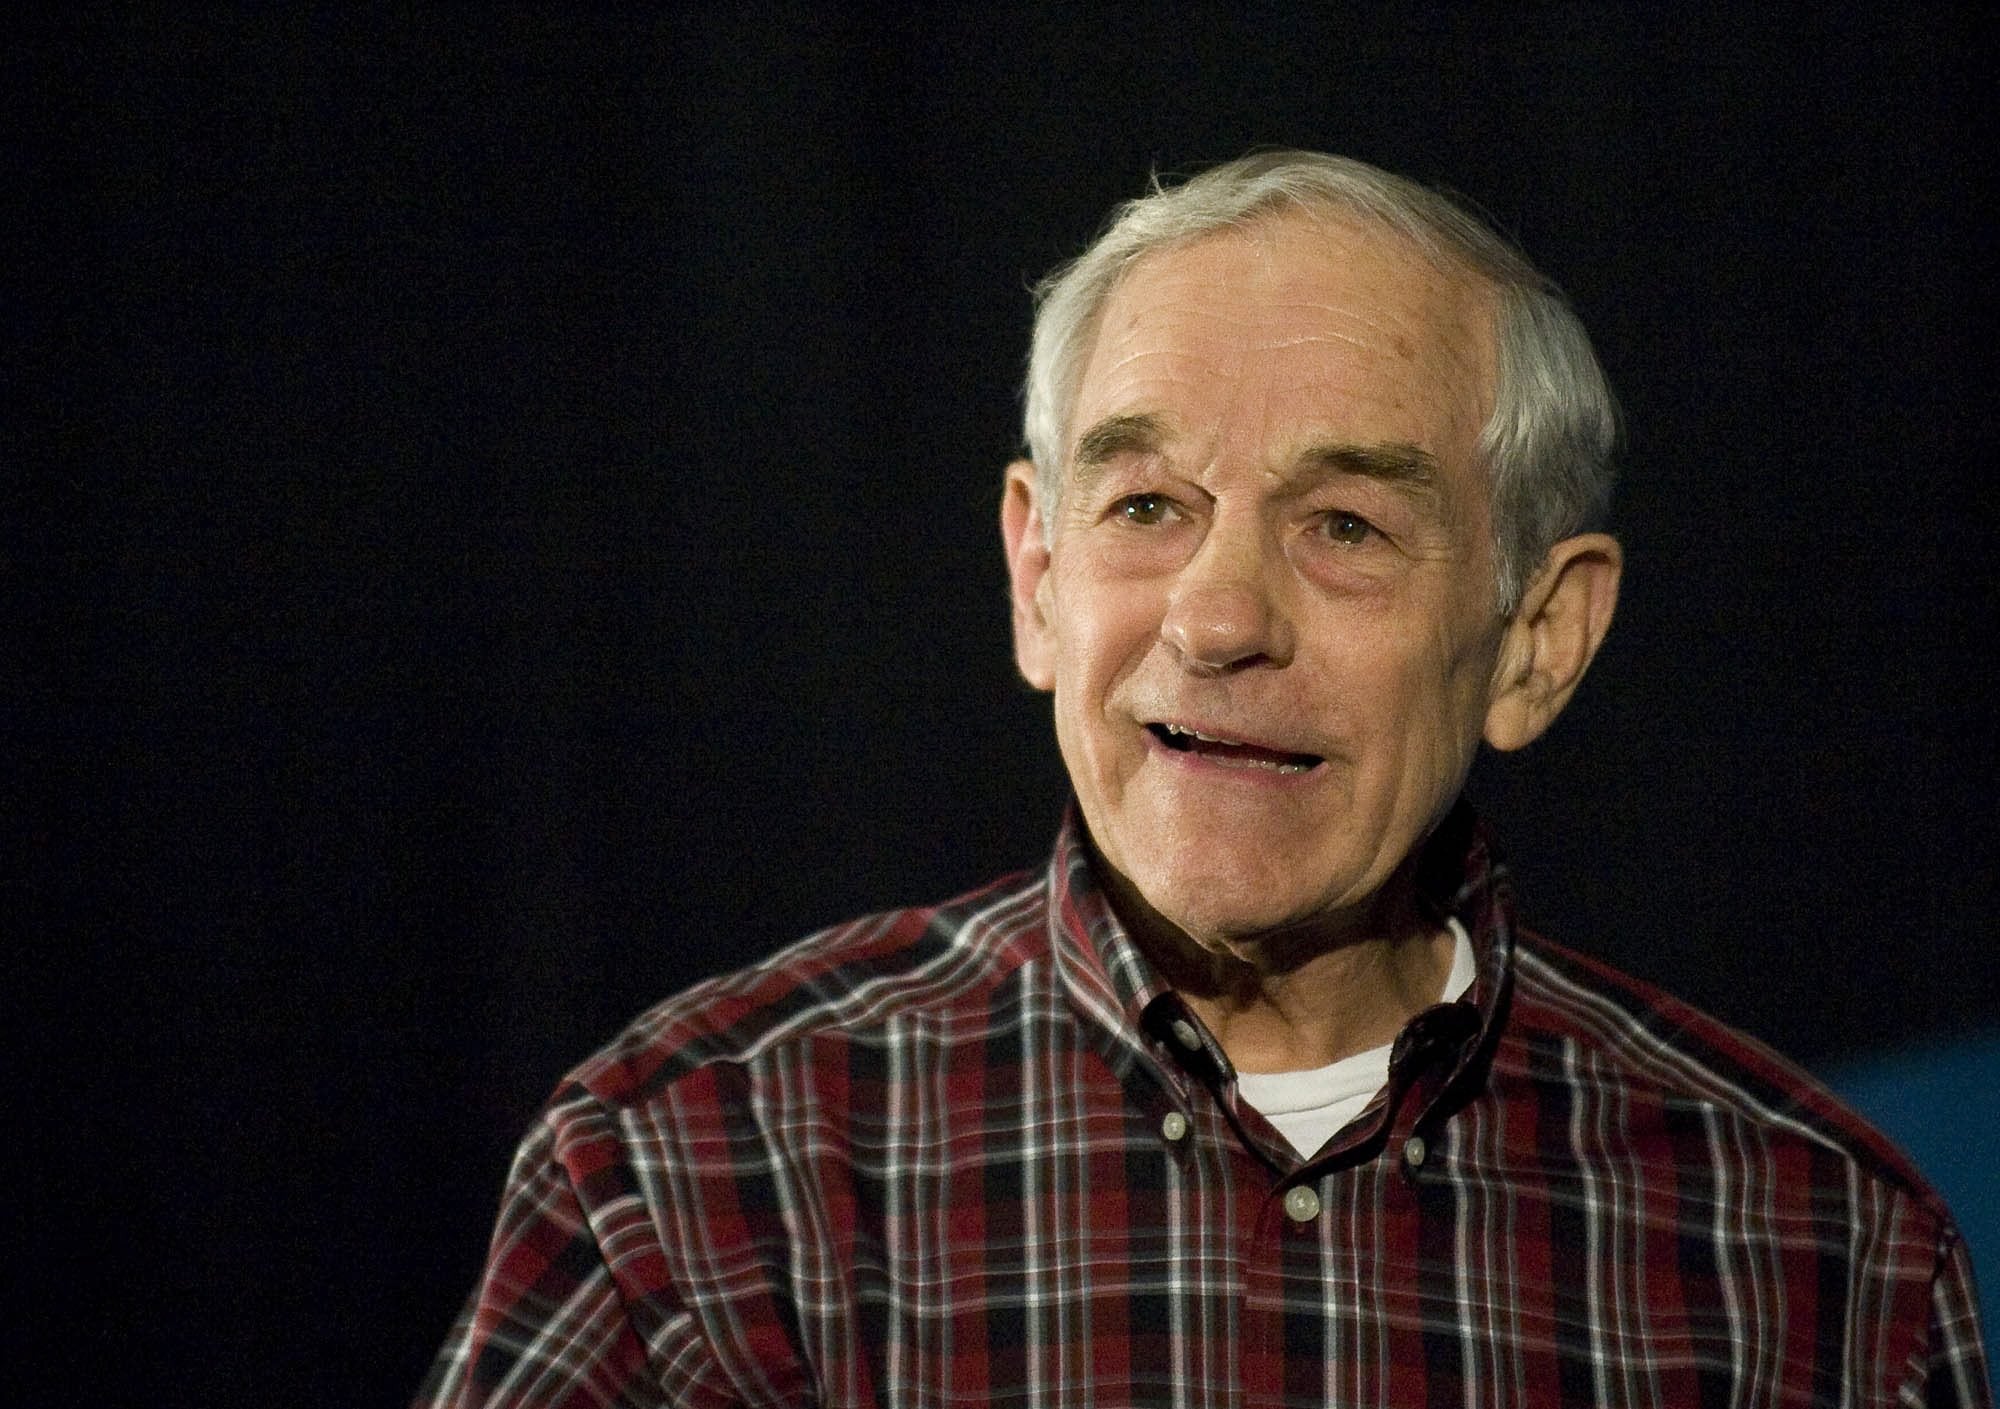 Presidential candidate Ron Paul speaks to a crowd at the Clark County Events Center at the Fairgrounds on Friday.